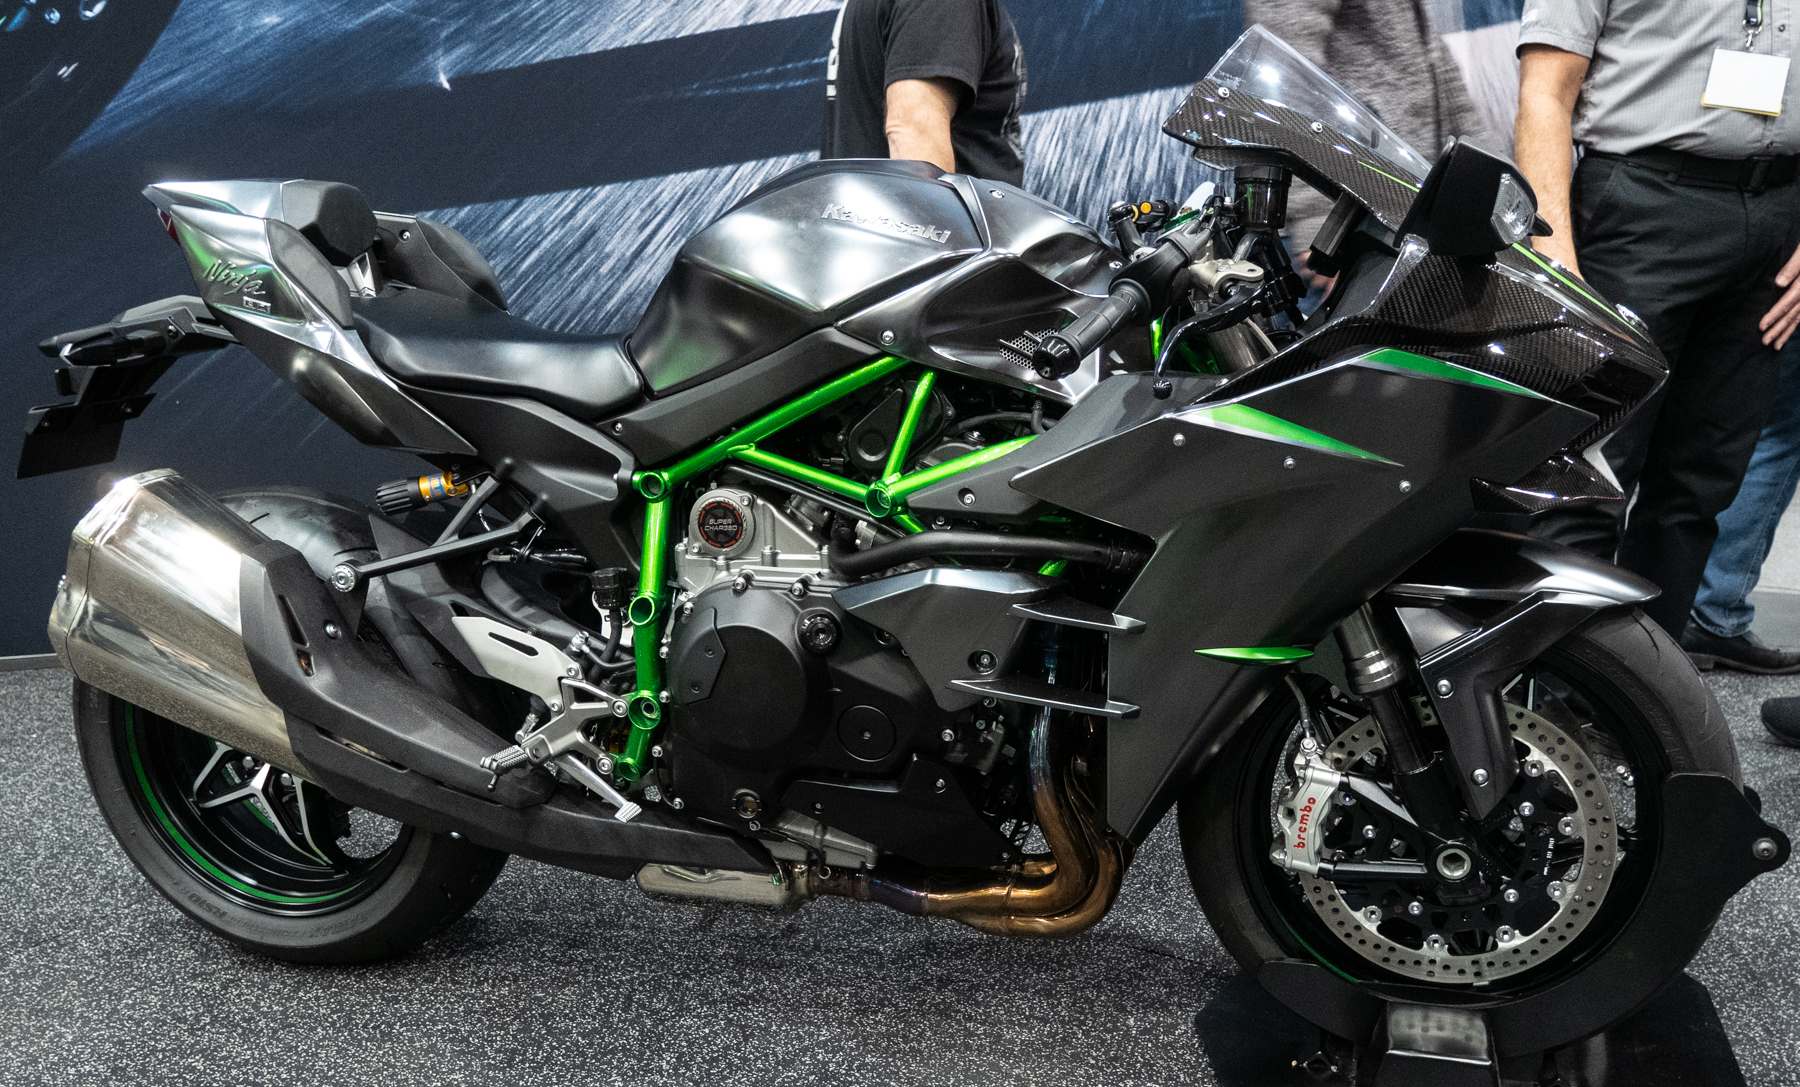 cleveland motorcycle show3 International Motorcycle Shows 2019 in Cleveland